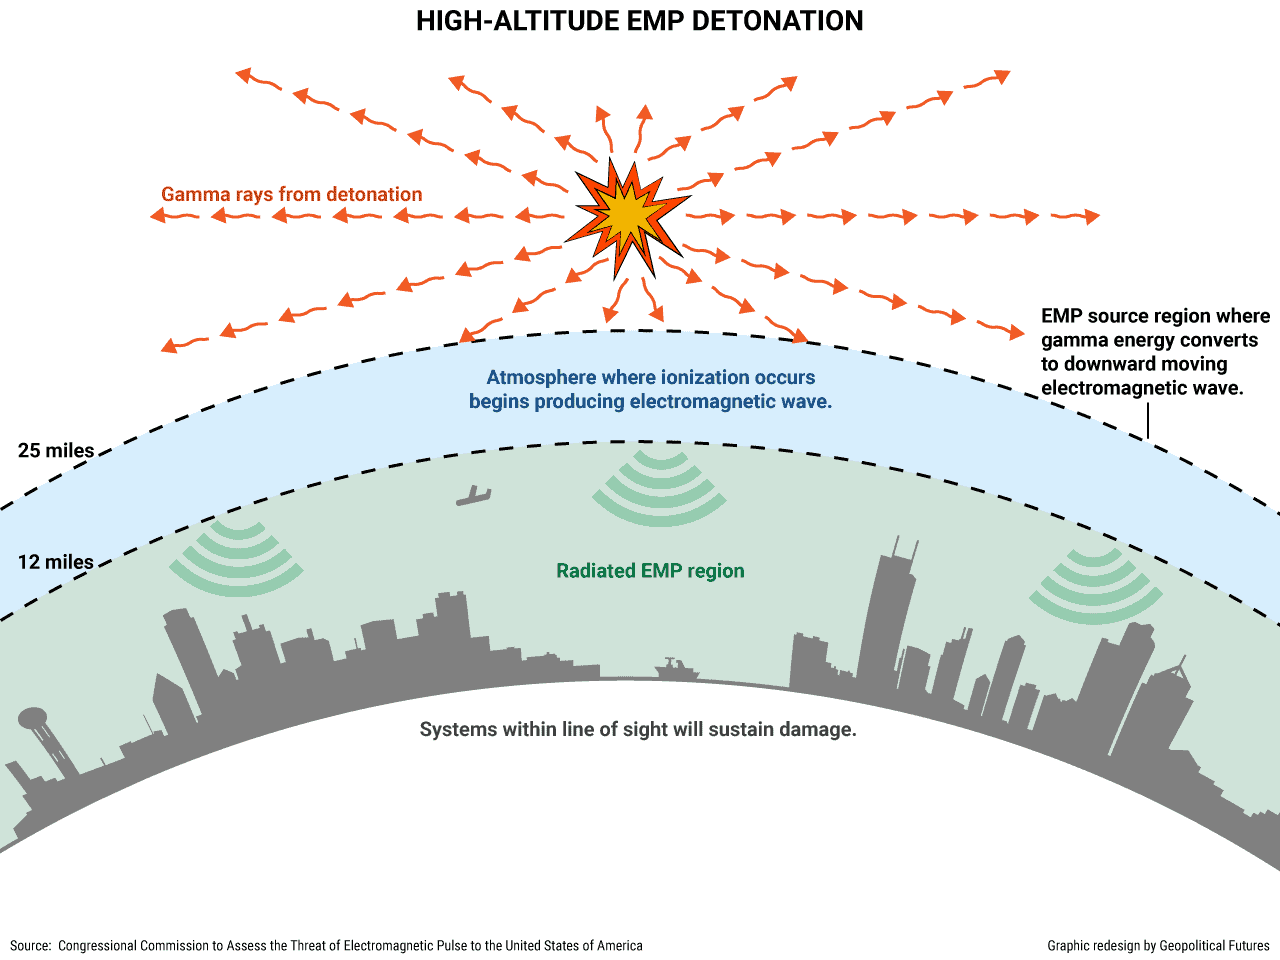 EMP Protection